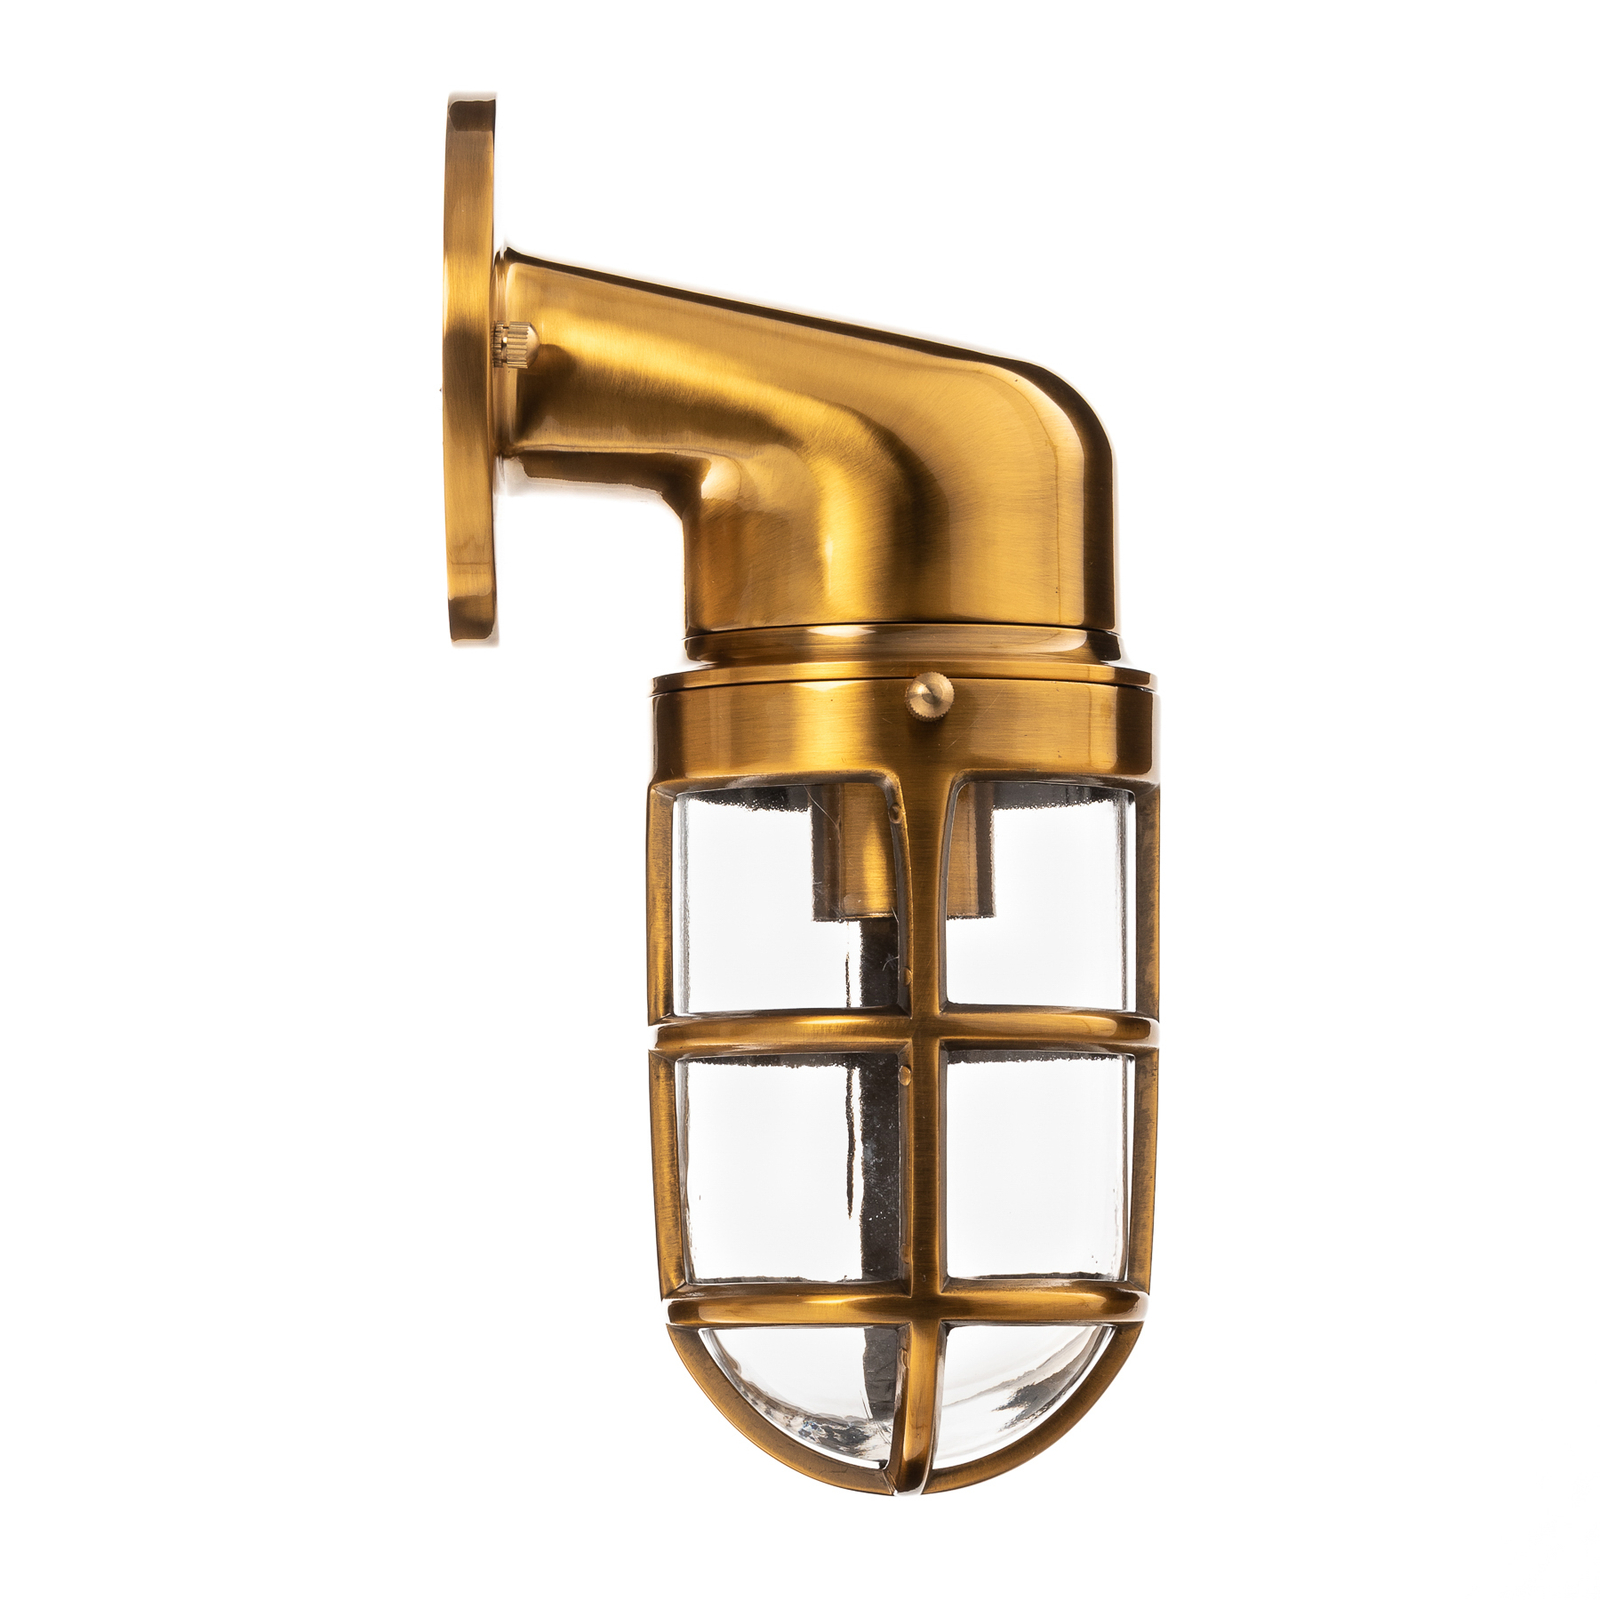 Dudley outdoor wall light, projecting at the bottom, brass